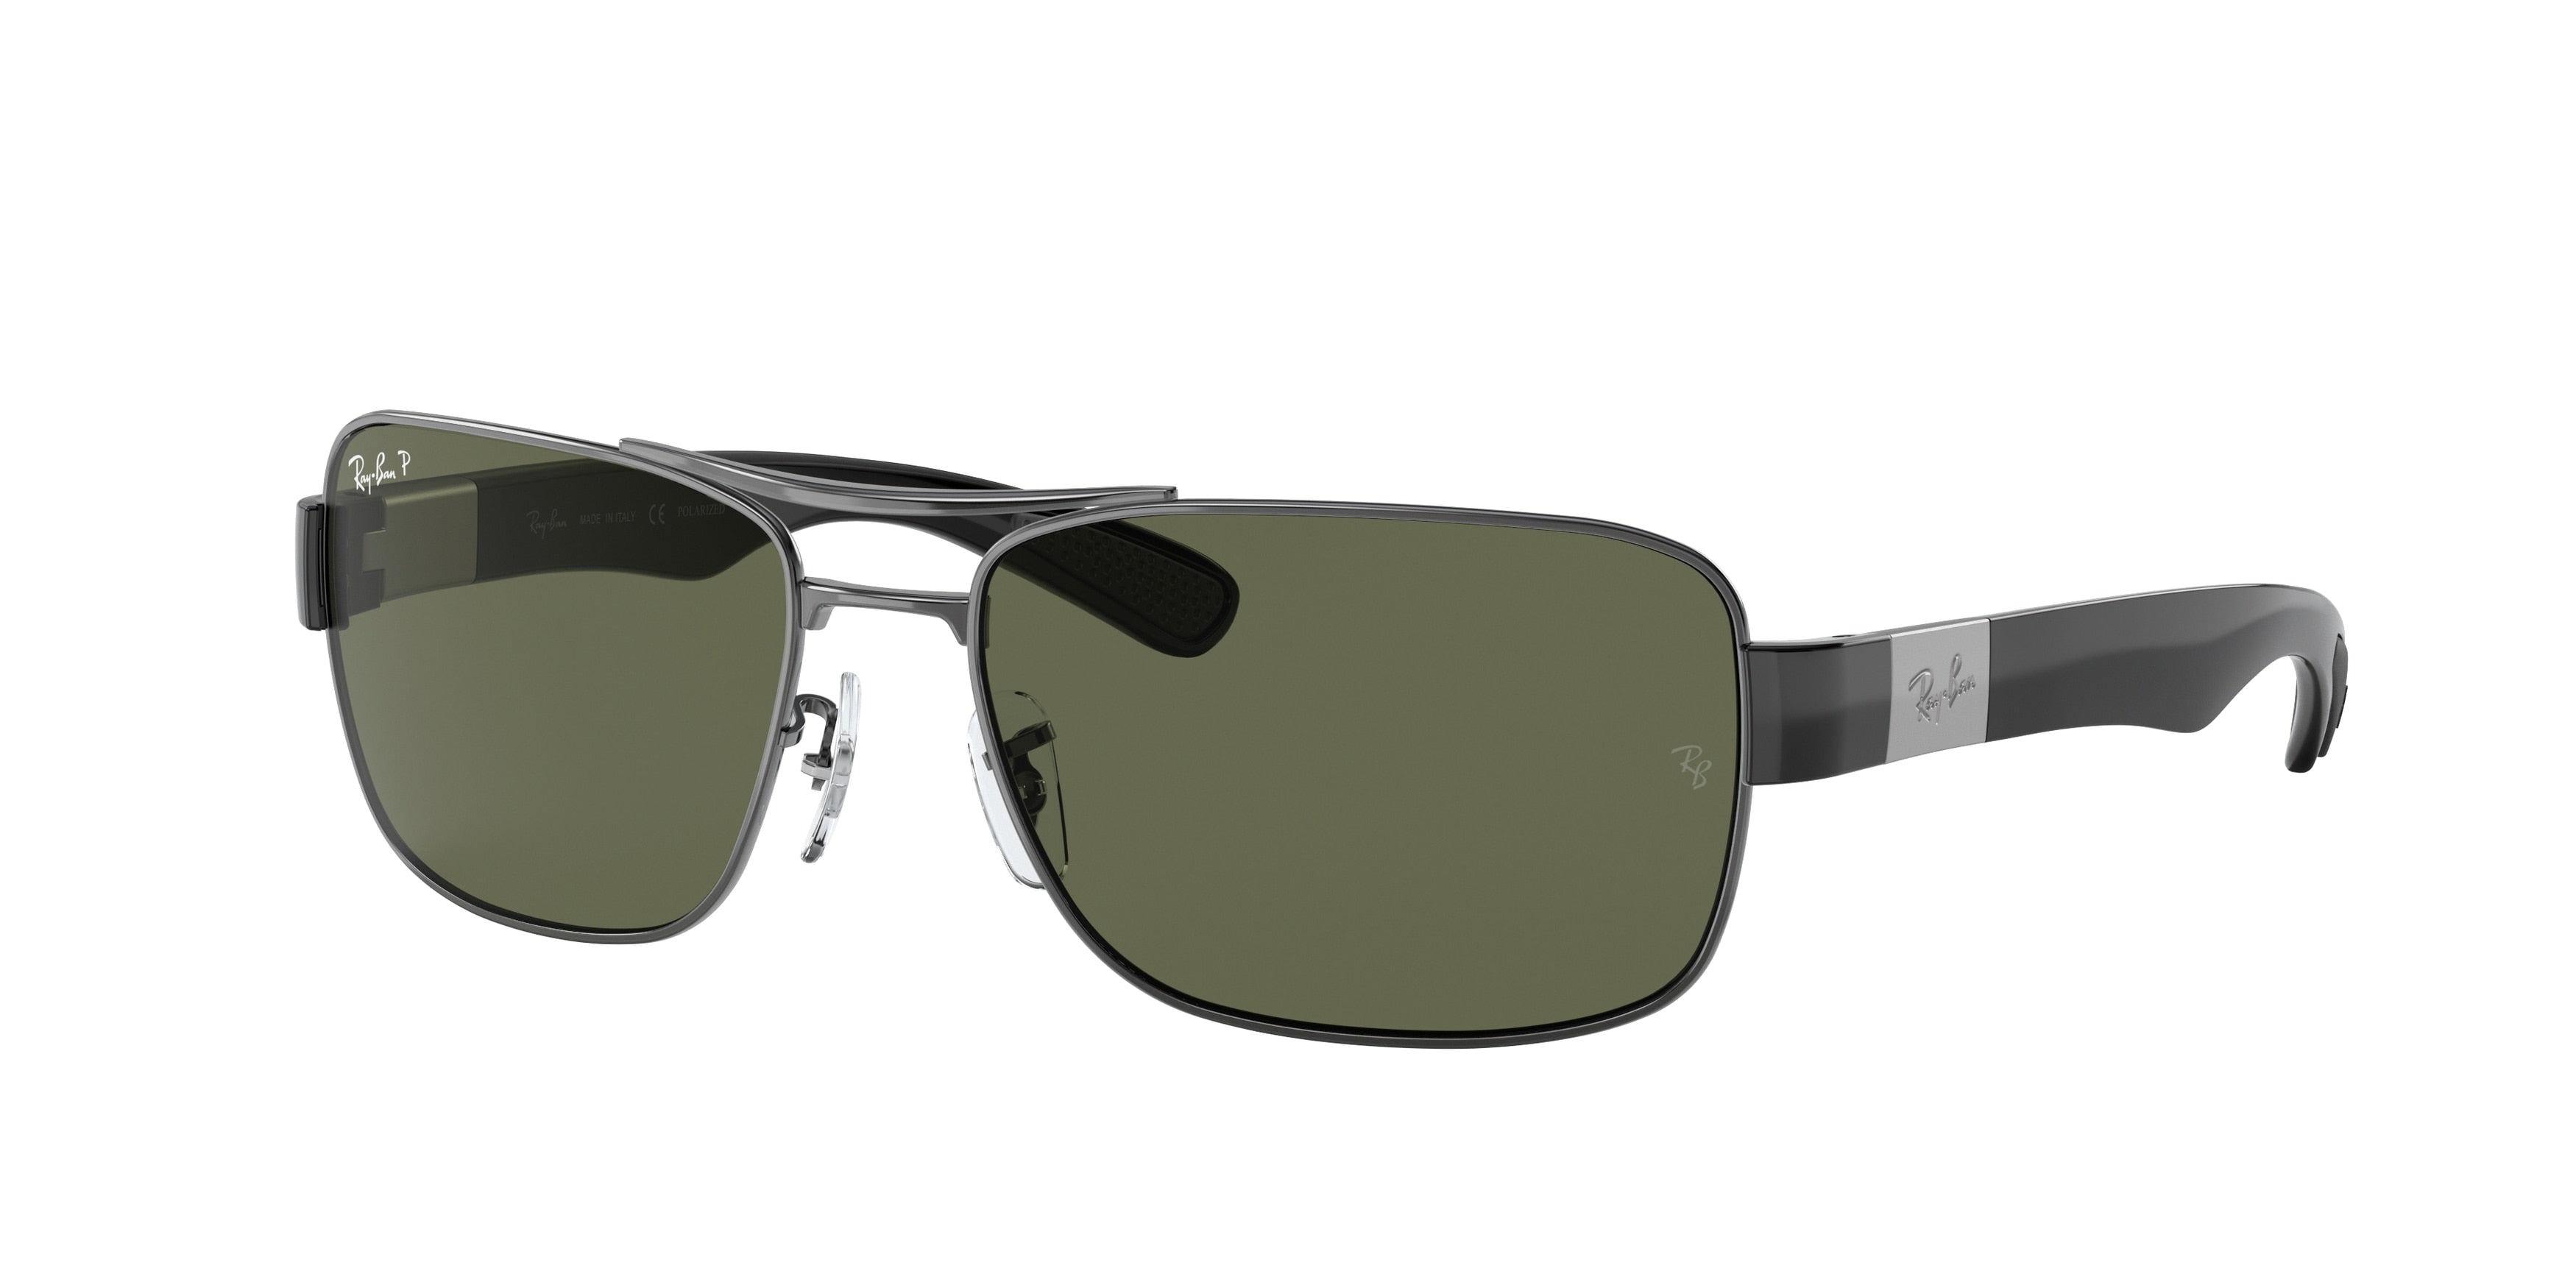 Ray-Ban RB3522 Square Sunglasses  004/9A-Gunmetal 64-135-17 - Color Map Grey